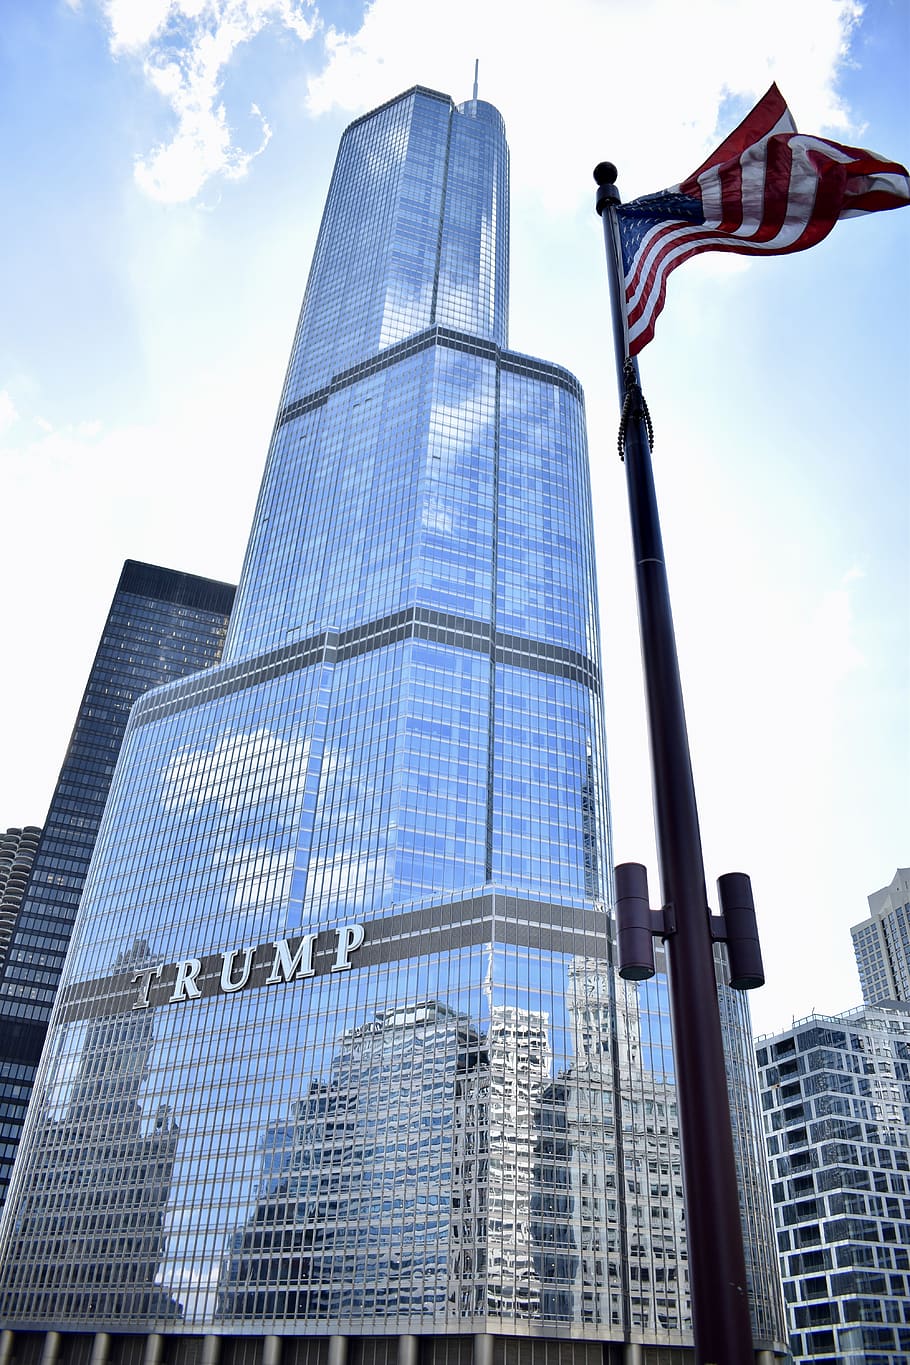 trump, tower, chicago, flag, architecture, built structure, building exterior, low angle view, sky, office building exterior